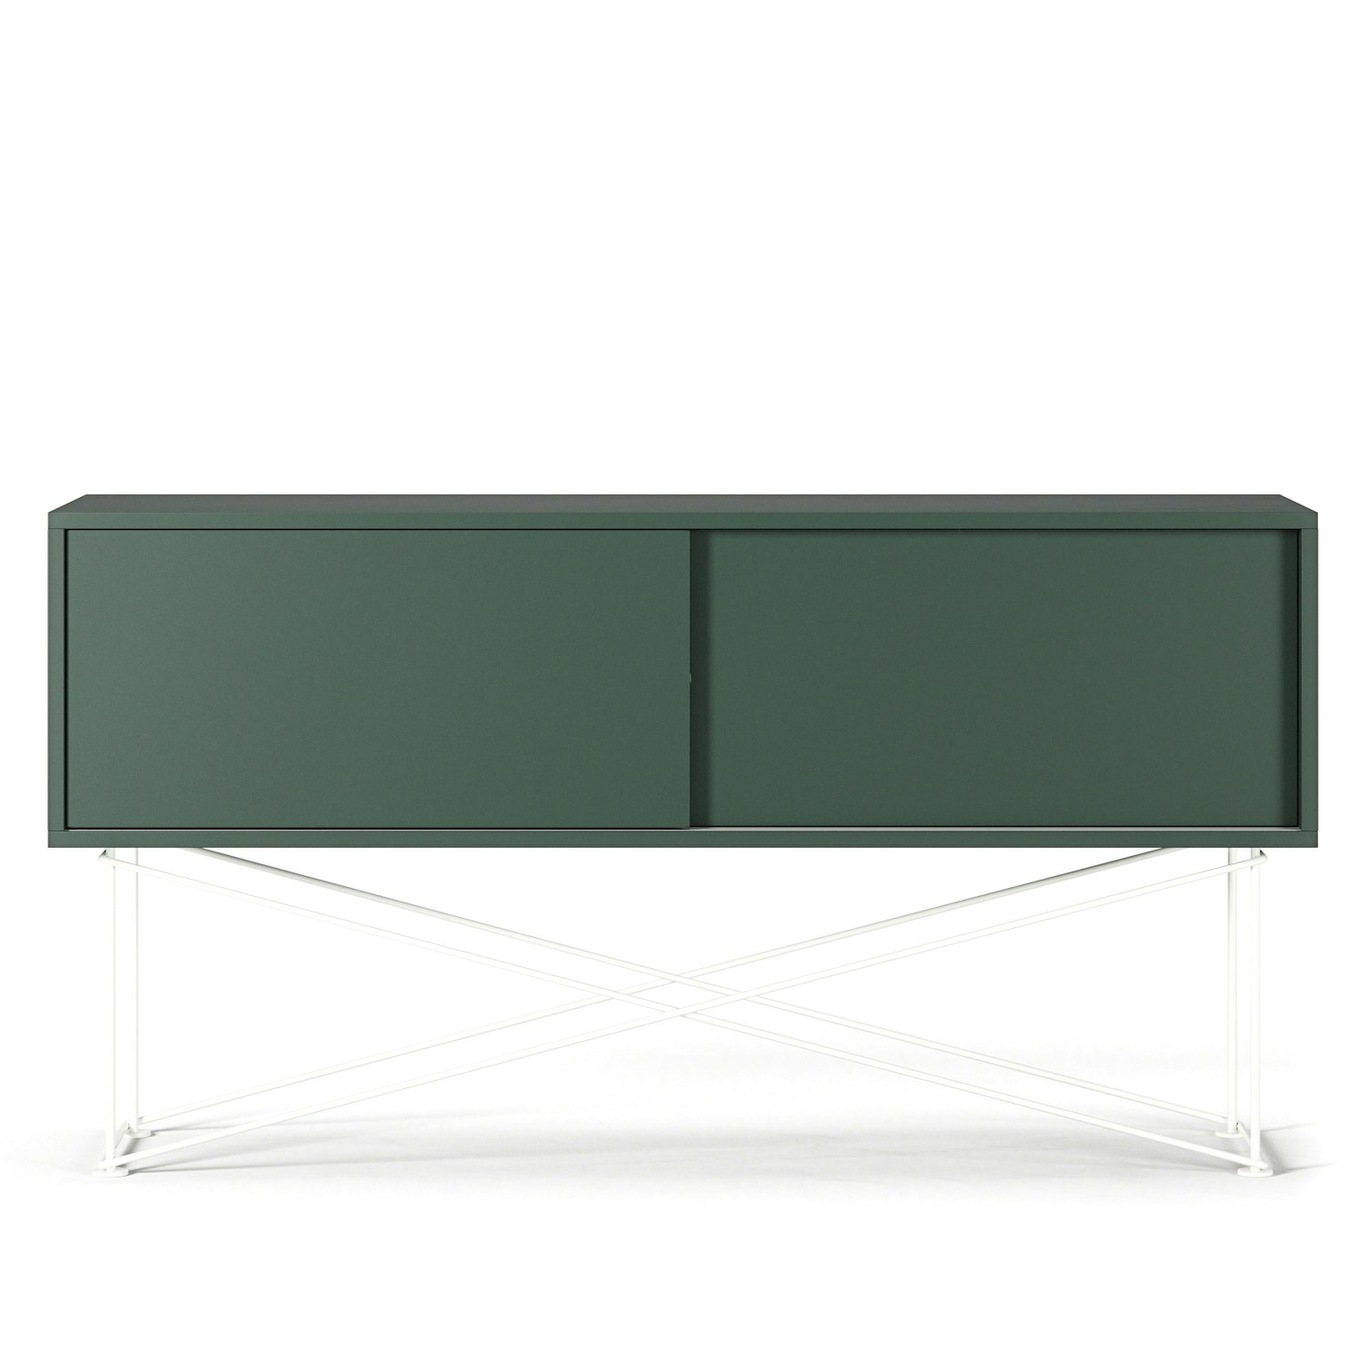 Vogue Media Bench With Stand 136 cm, Green / White